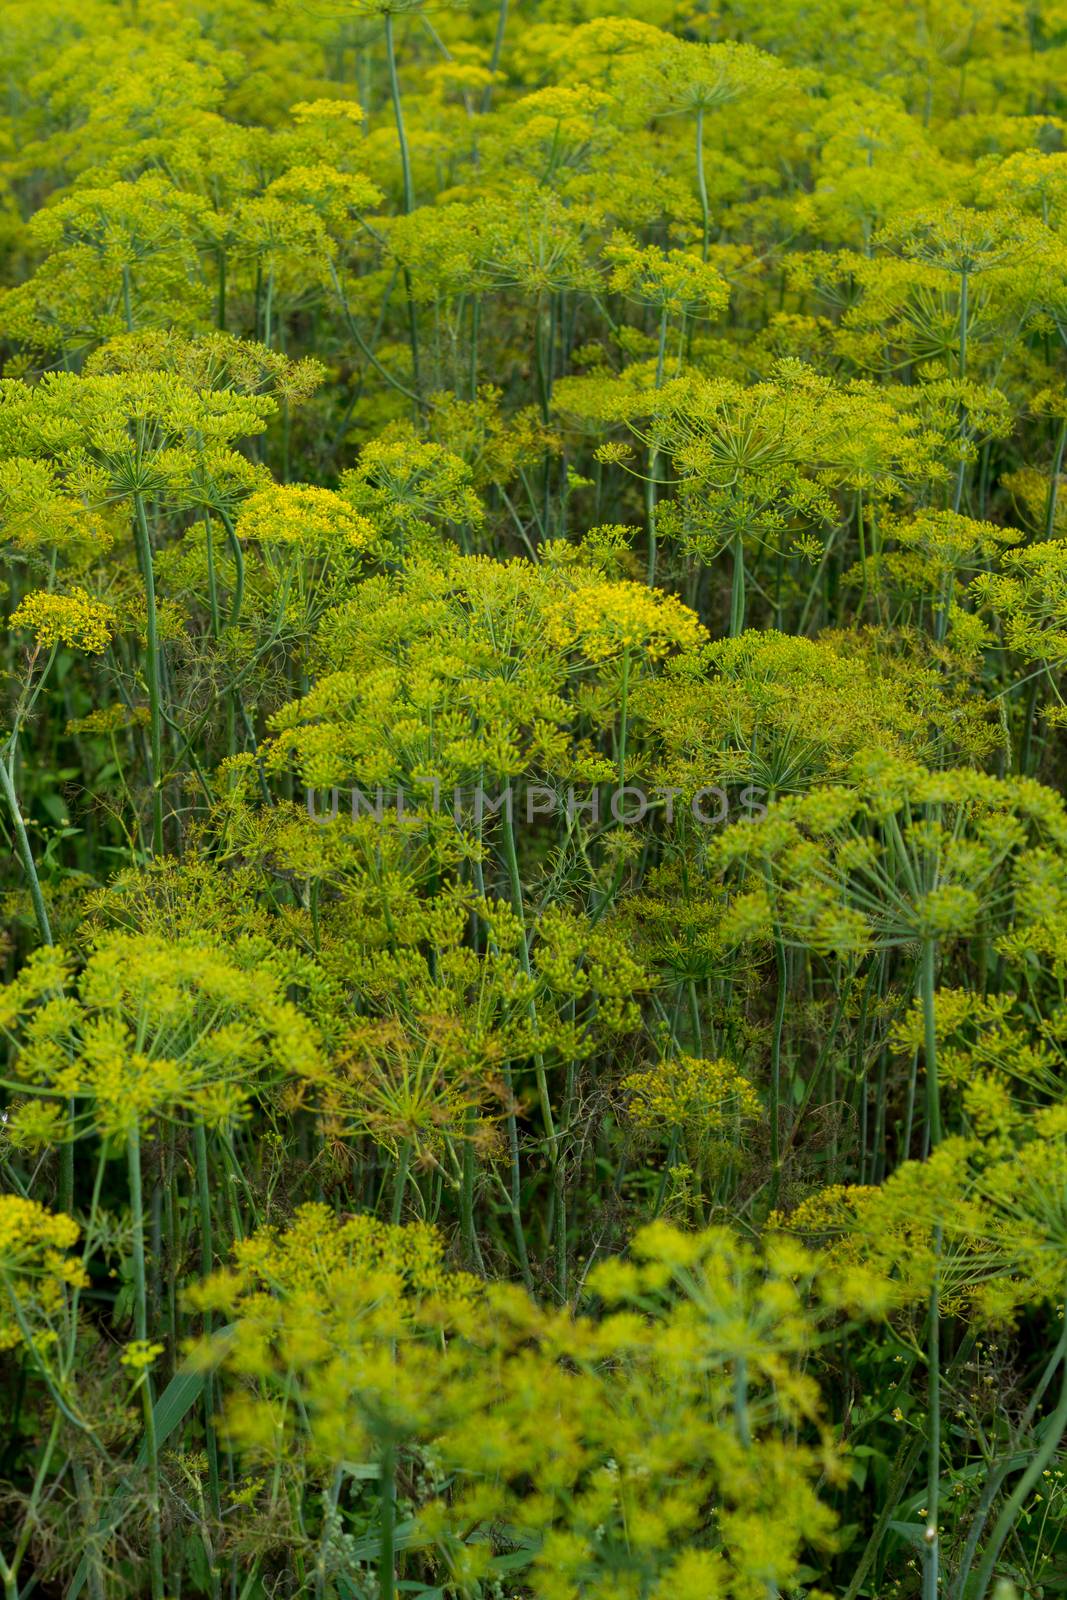 some yellow fennel growing on the field